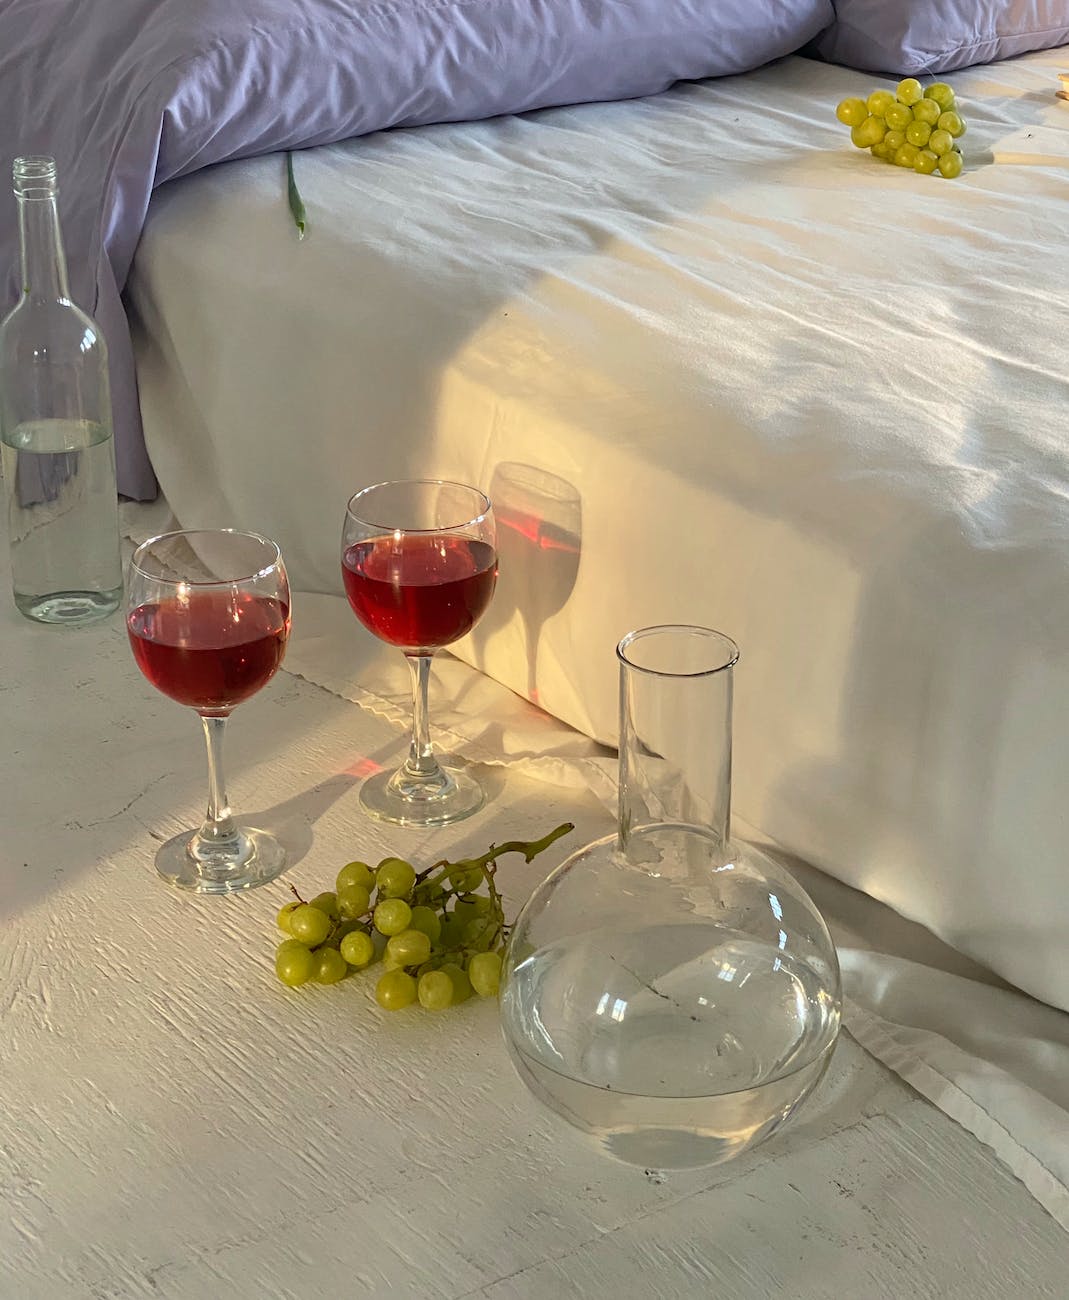 glasses with wine near jar with water and bed